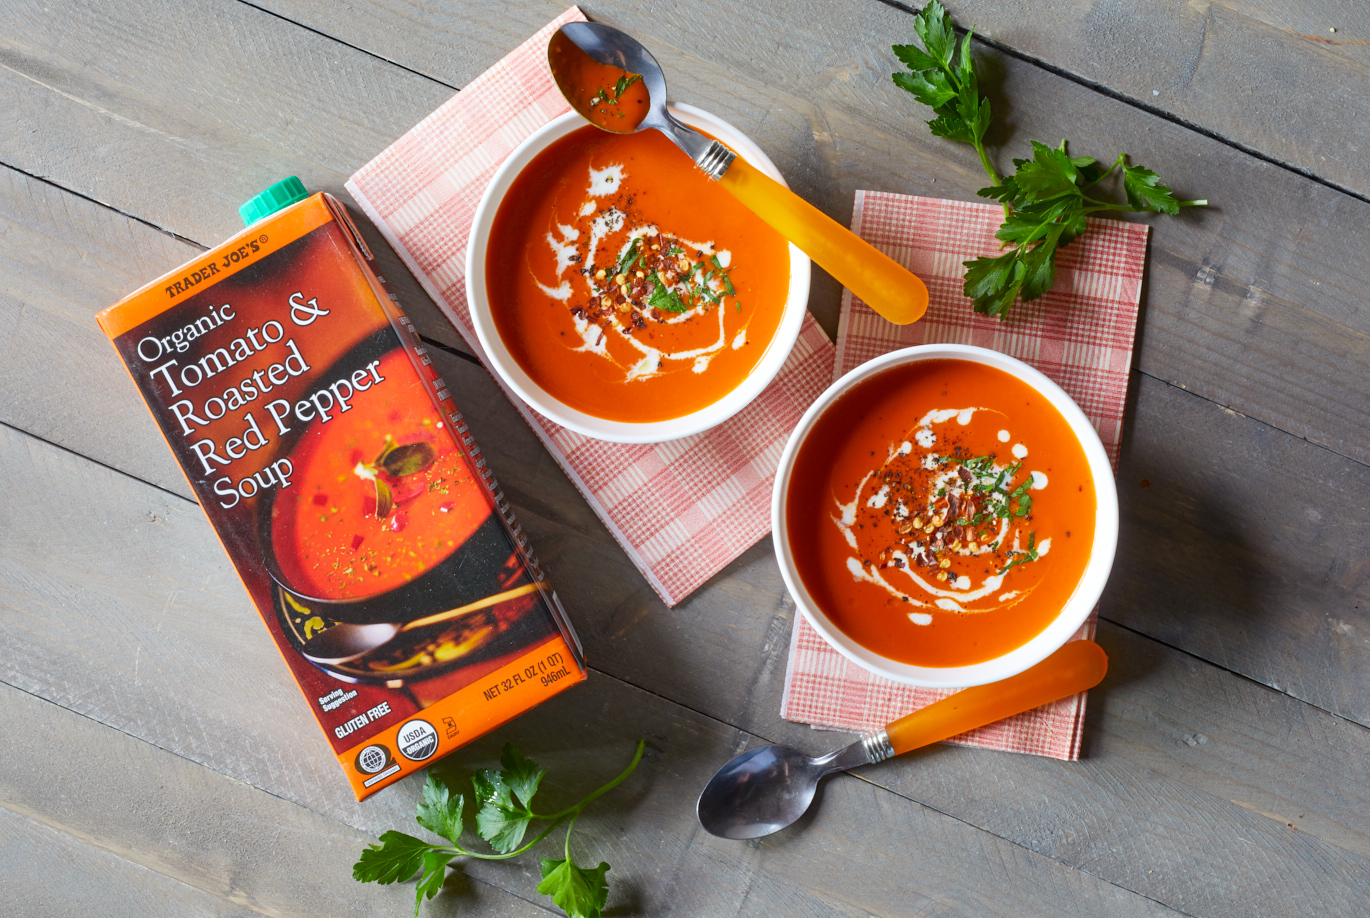 https://www.traderjoes.com/content/dam/trjo/context-images/57879-Org-Tomato-Red-Pepper-Soup-pdp.jpg